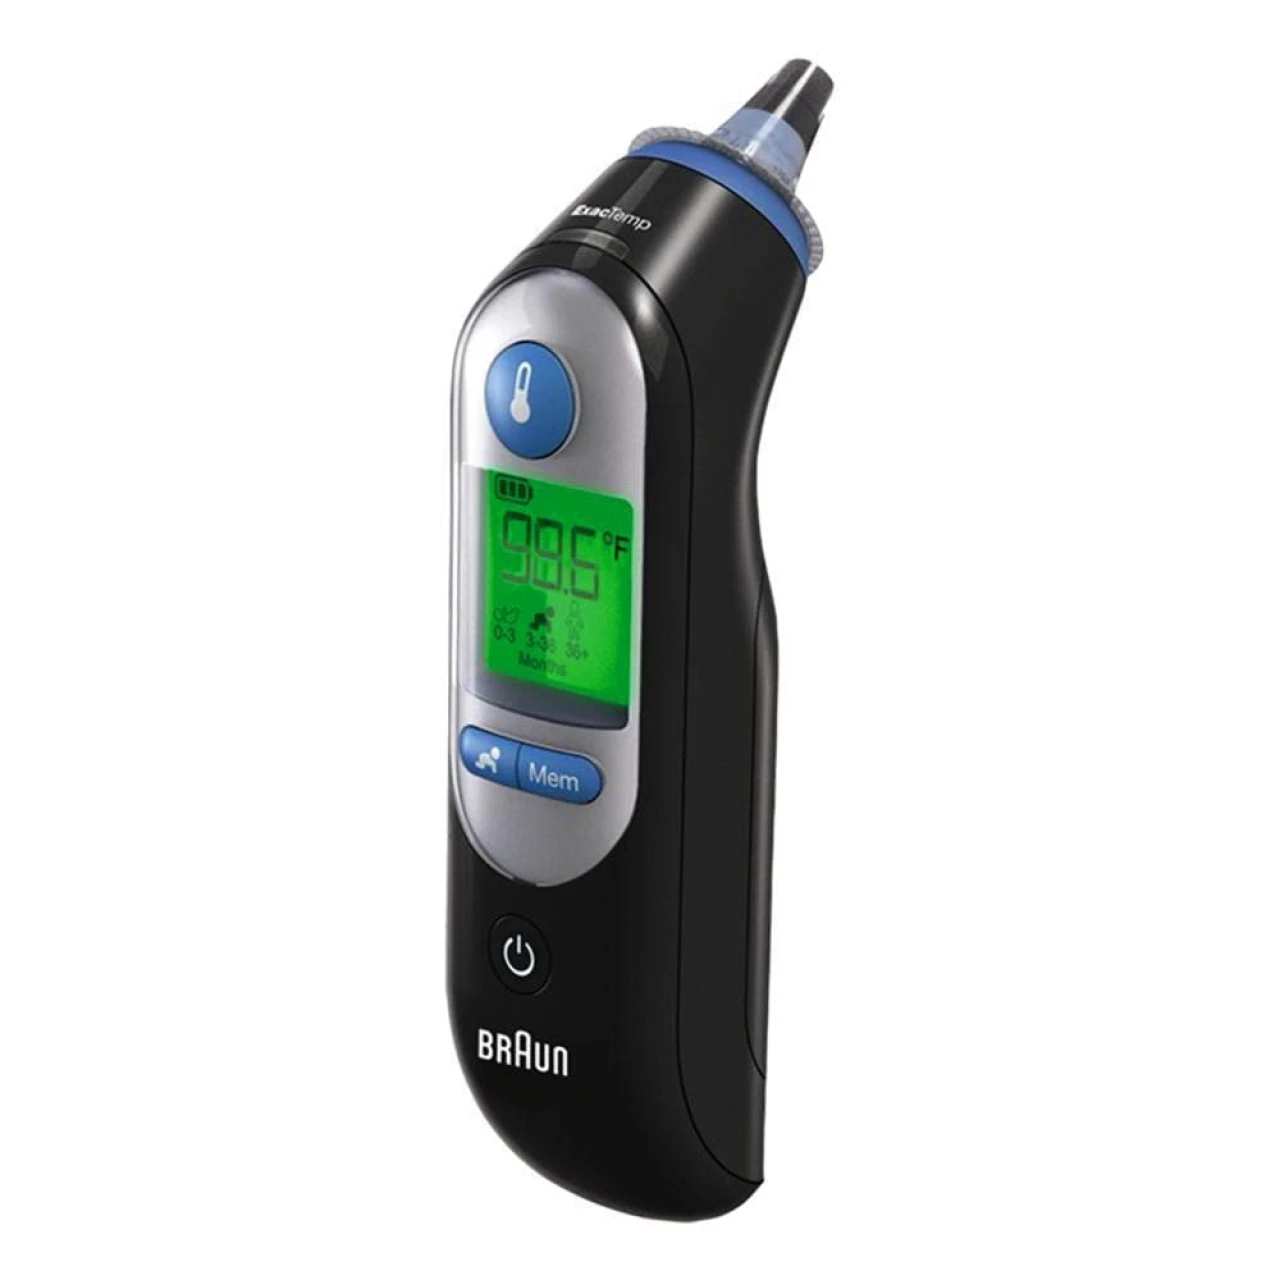 Braun ThermoScan 7 - Digital Ear Thermometer